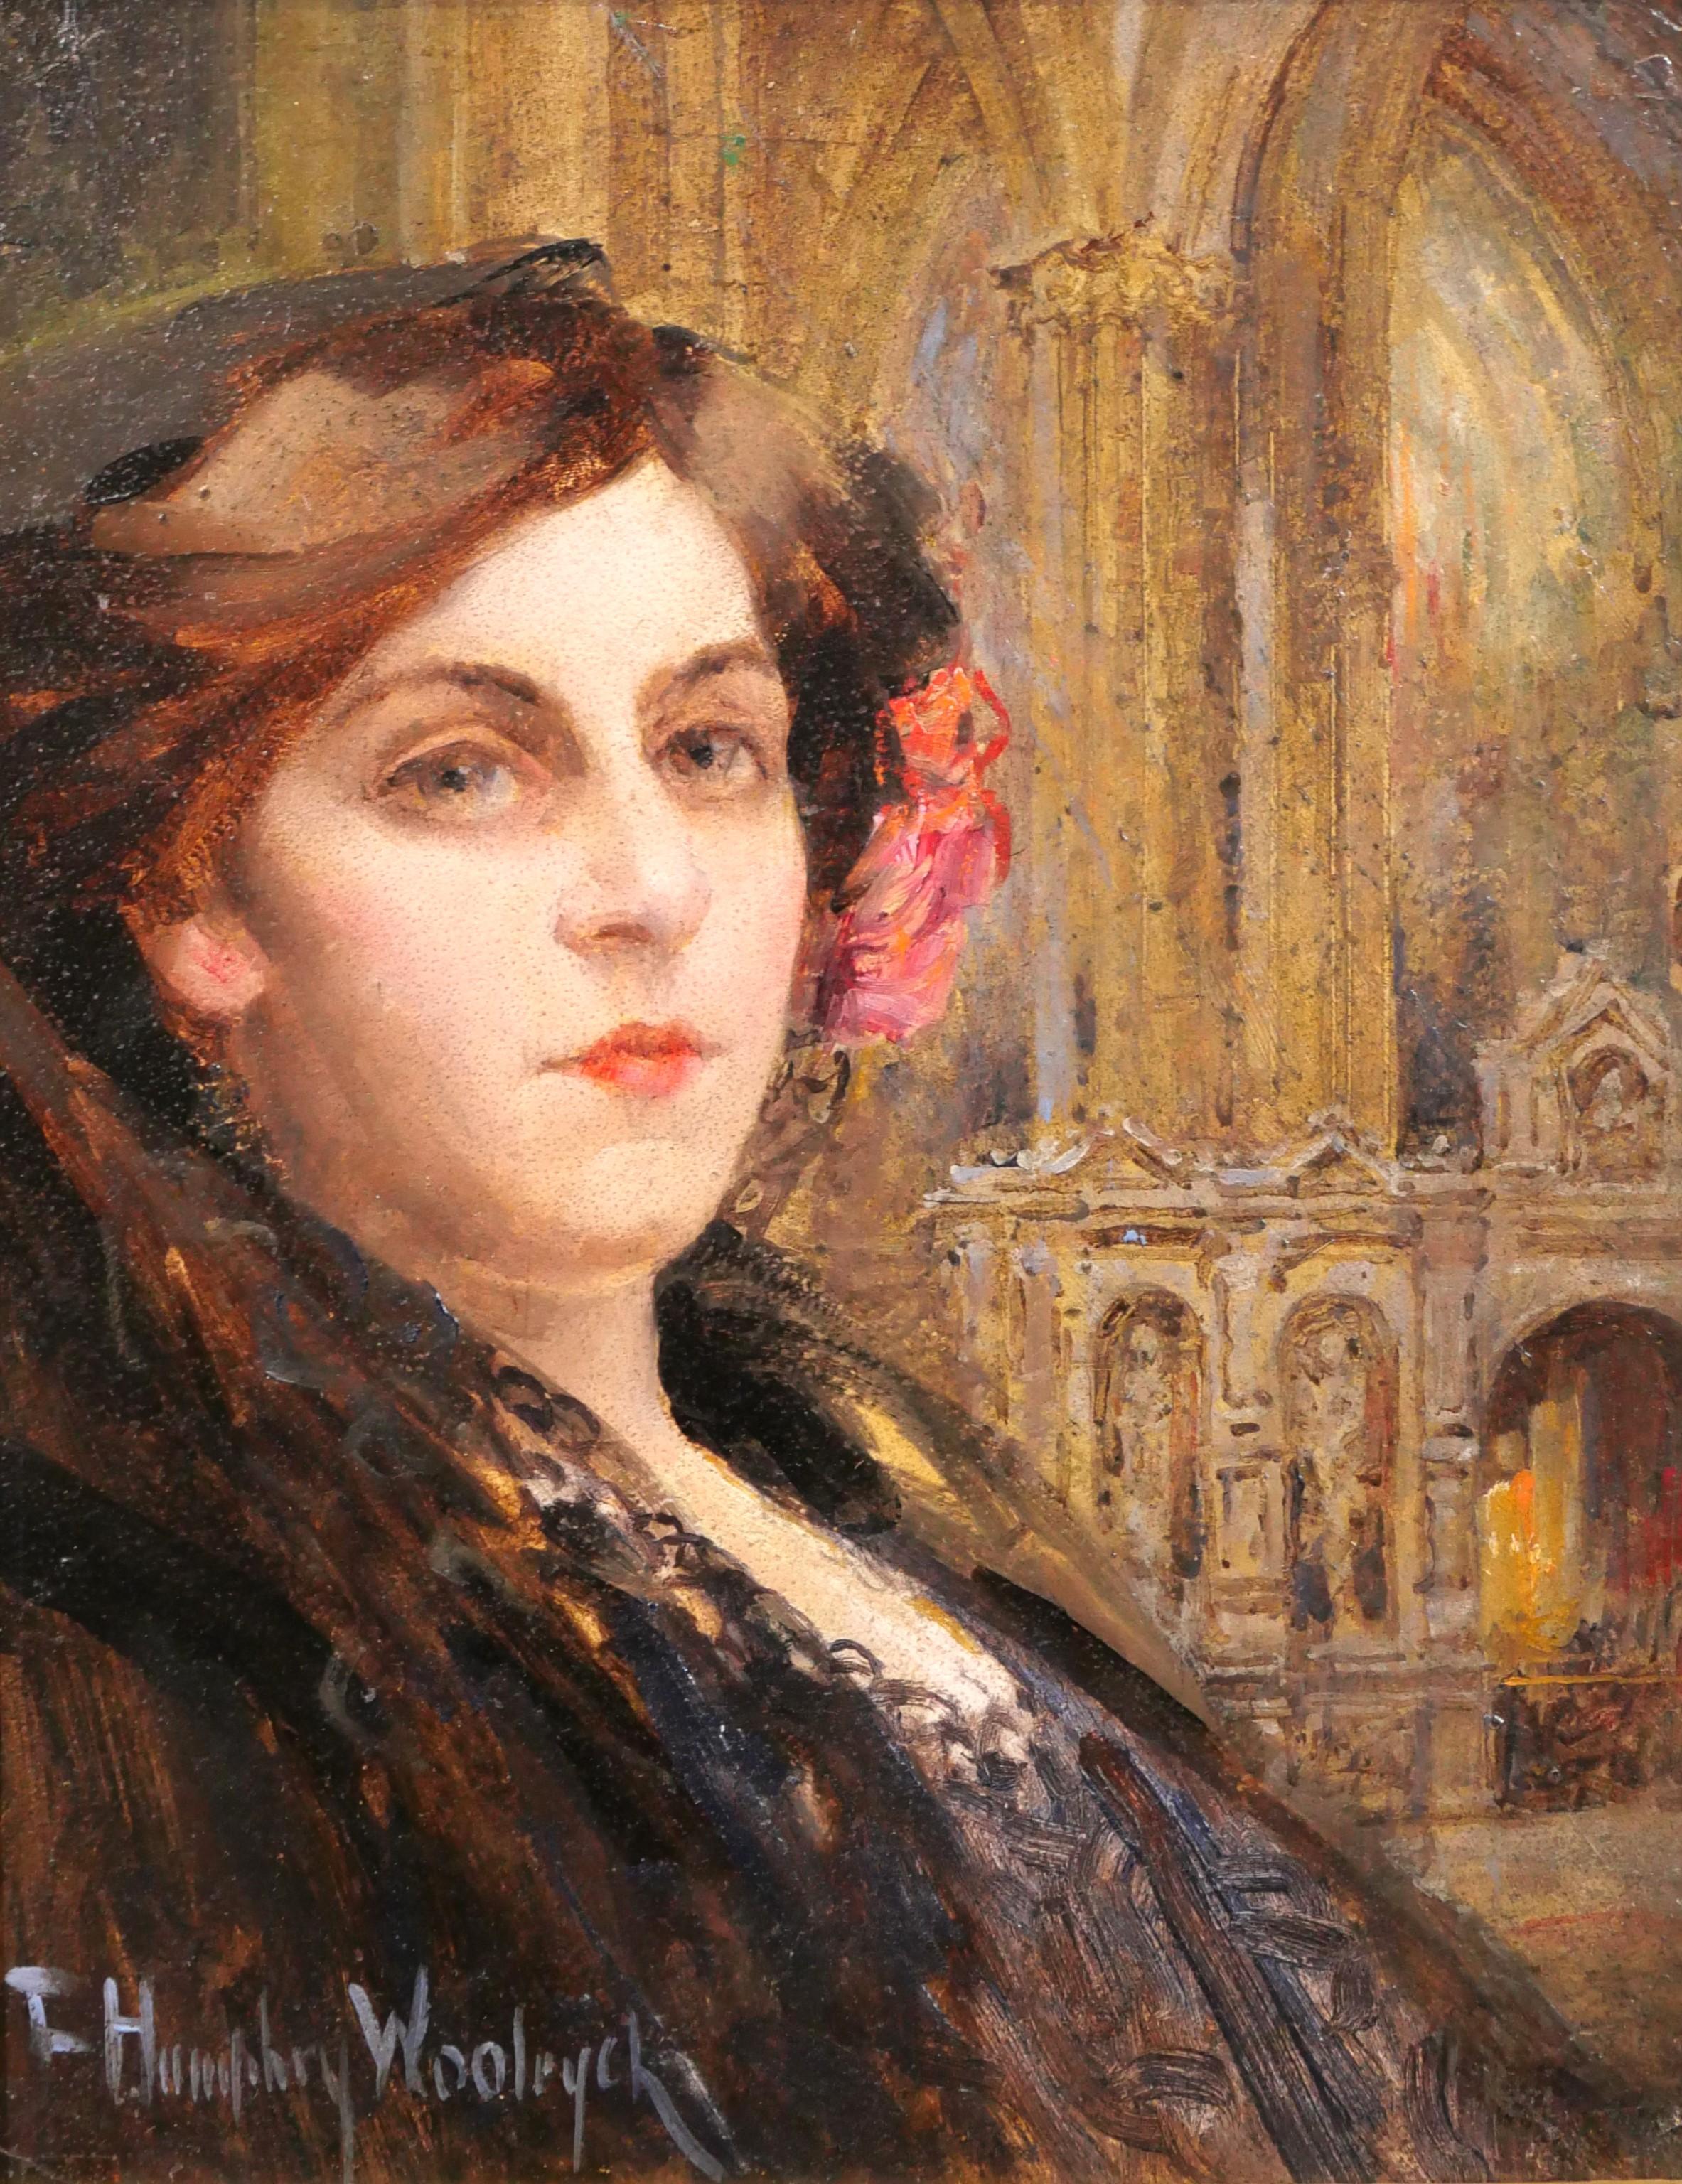 Francis Humphrey Woolrych Portrait Painting - Portrait of a spanish woman in a church